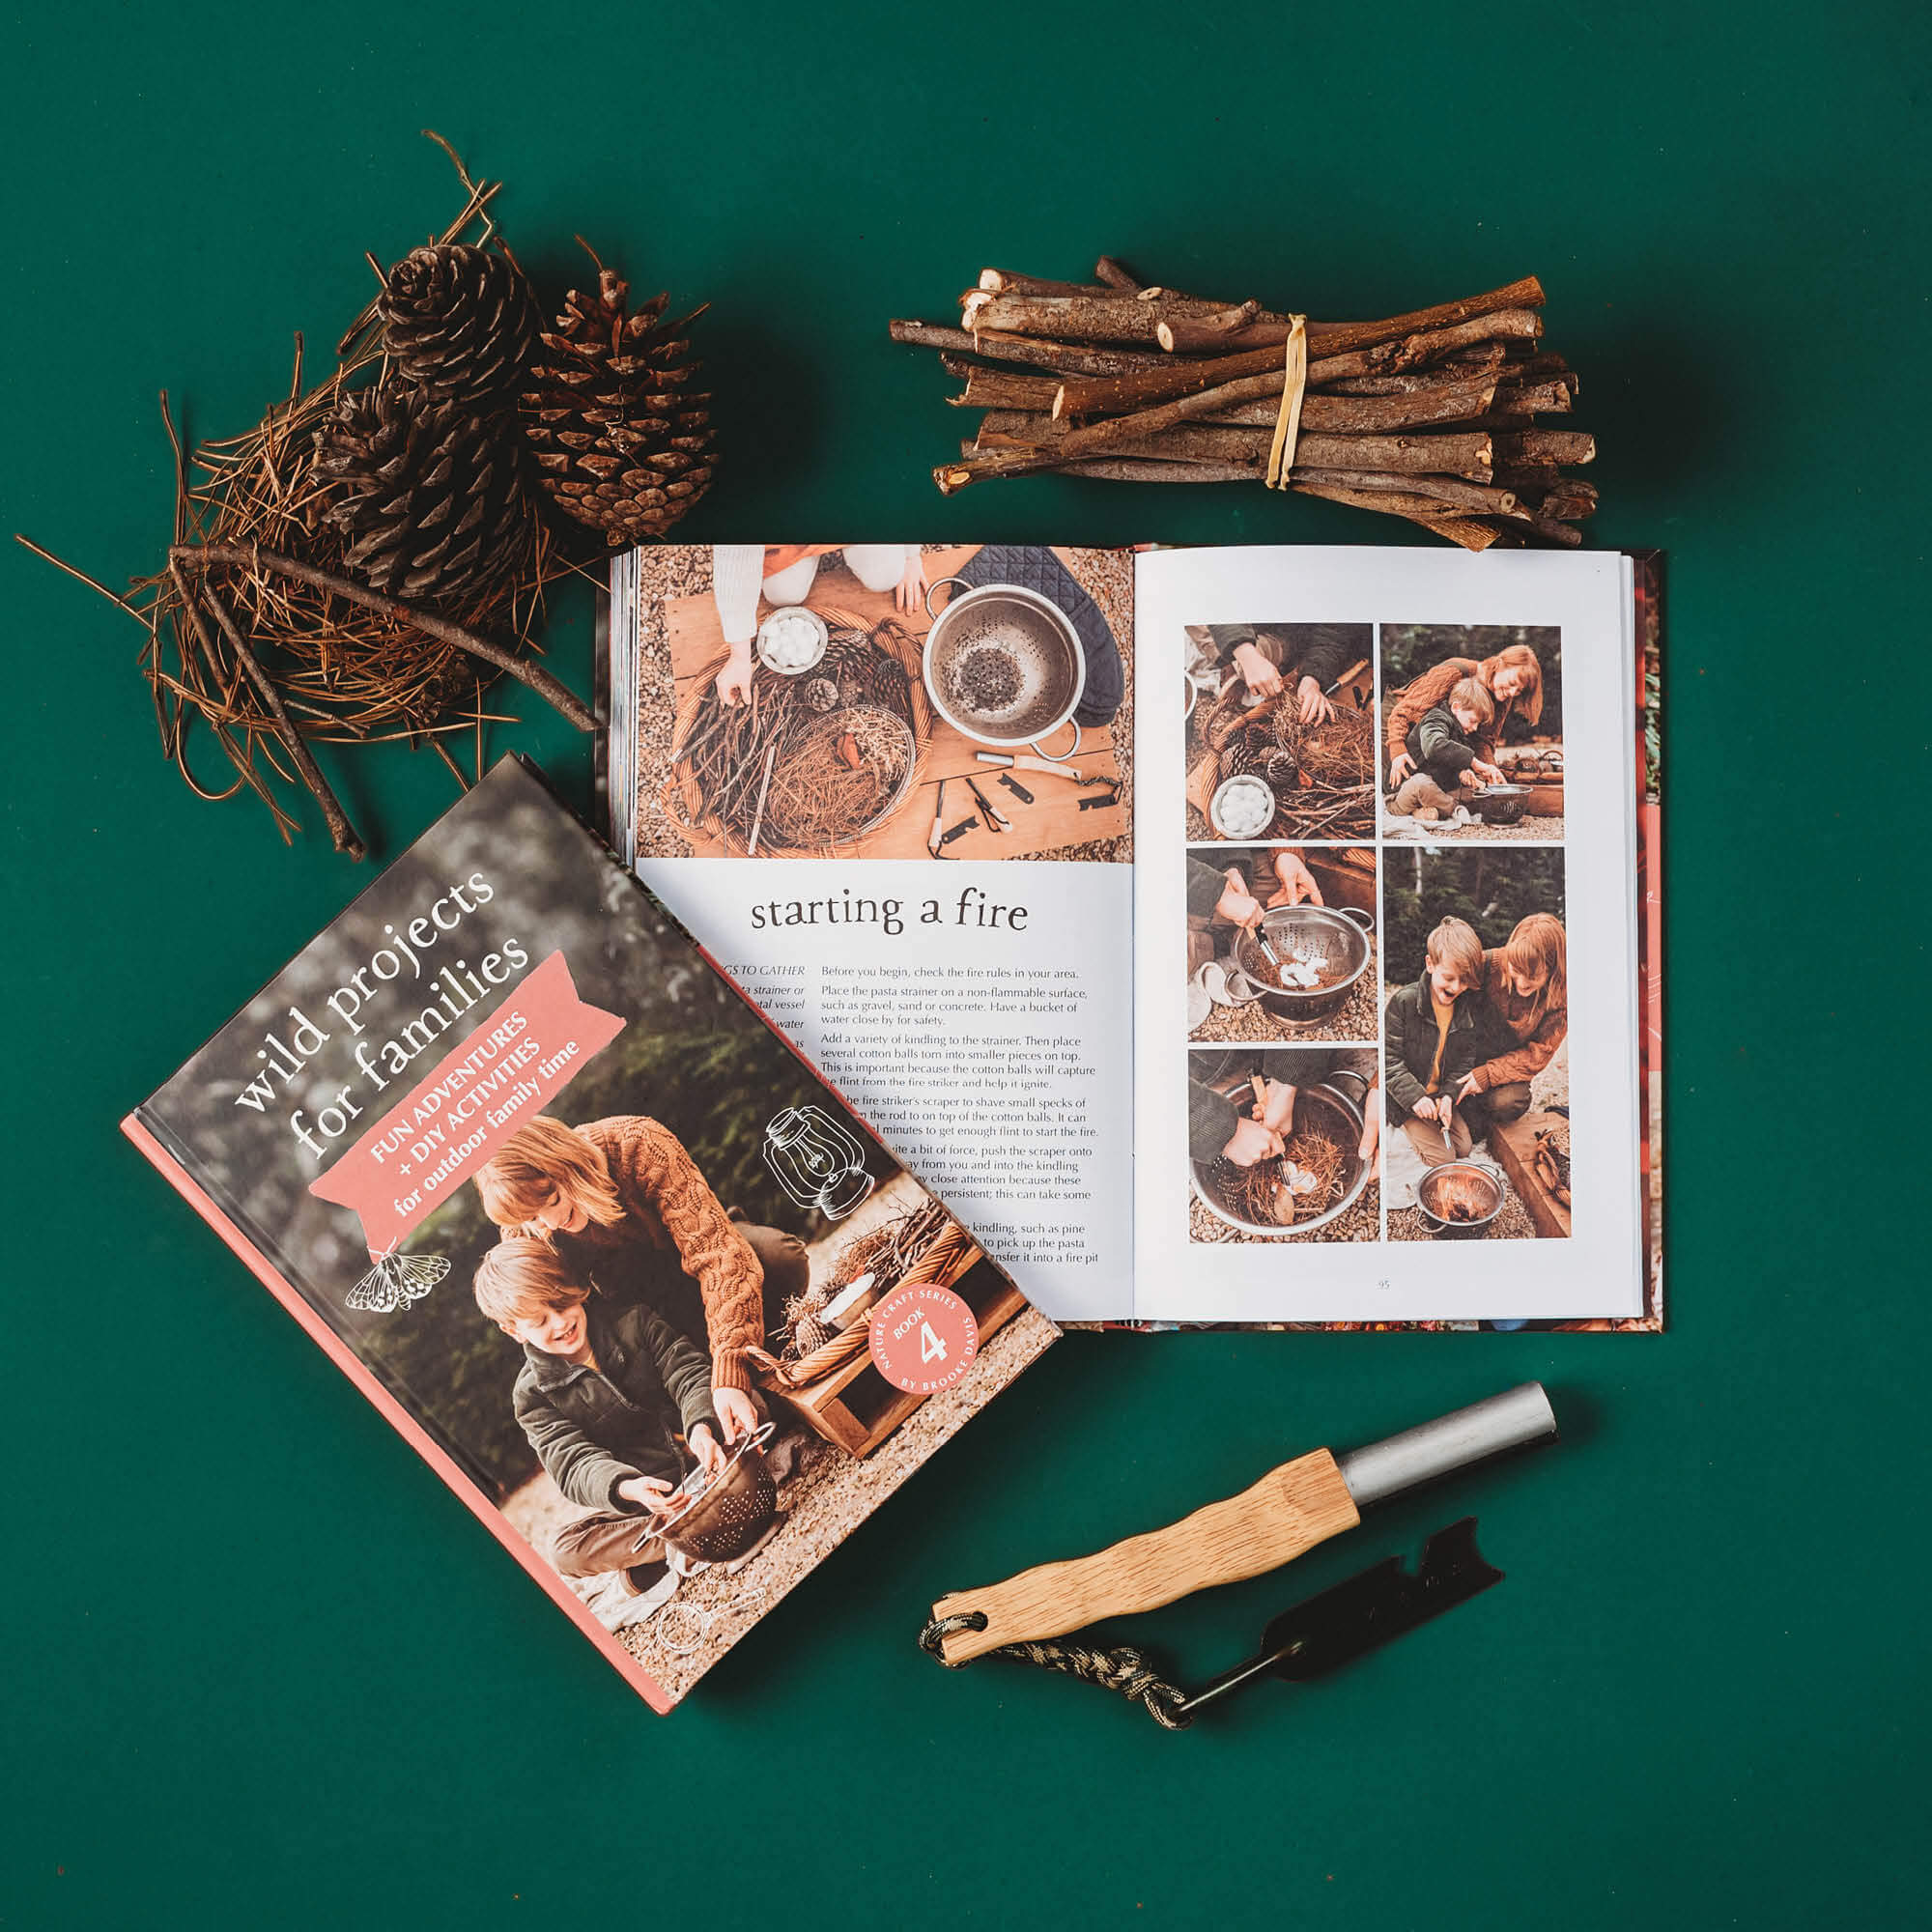 pages from Real Tools Bundle by Your Wild Books includes Wild Projects for Families book, whittling knife, hand drill and fire starter.